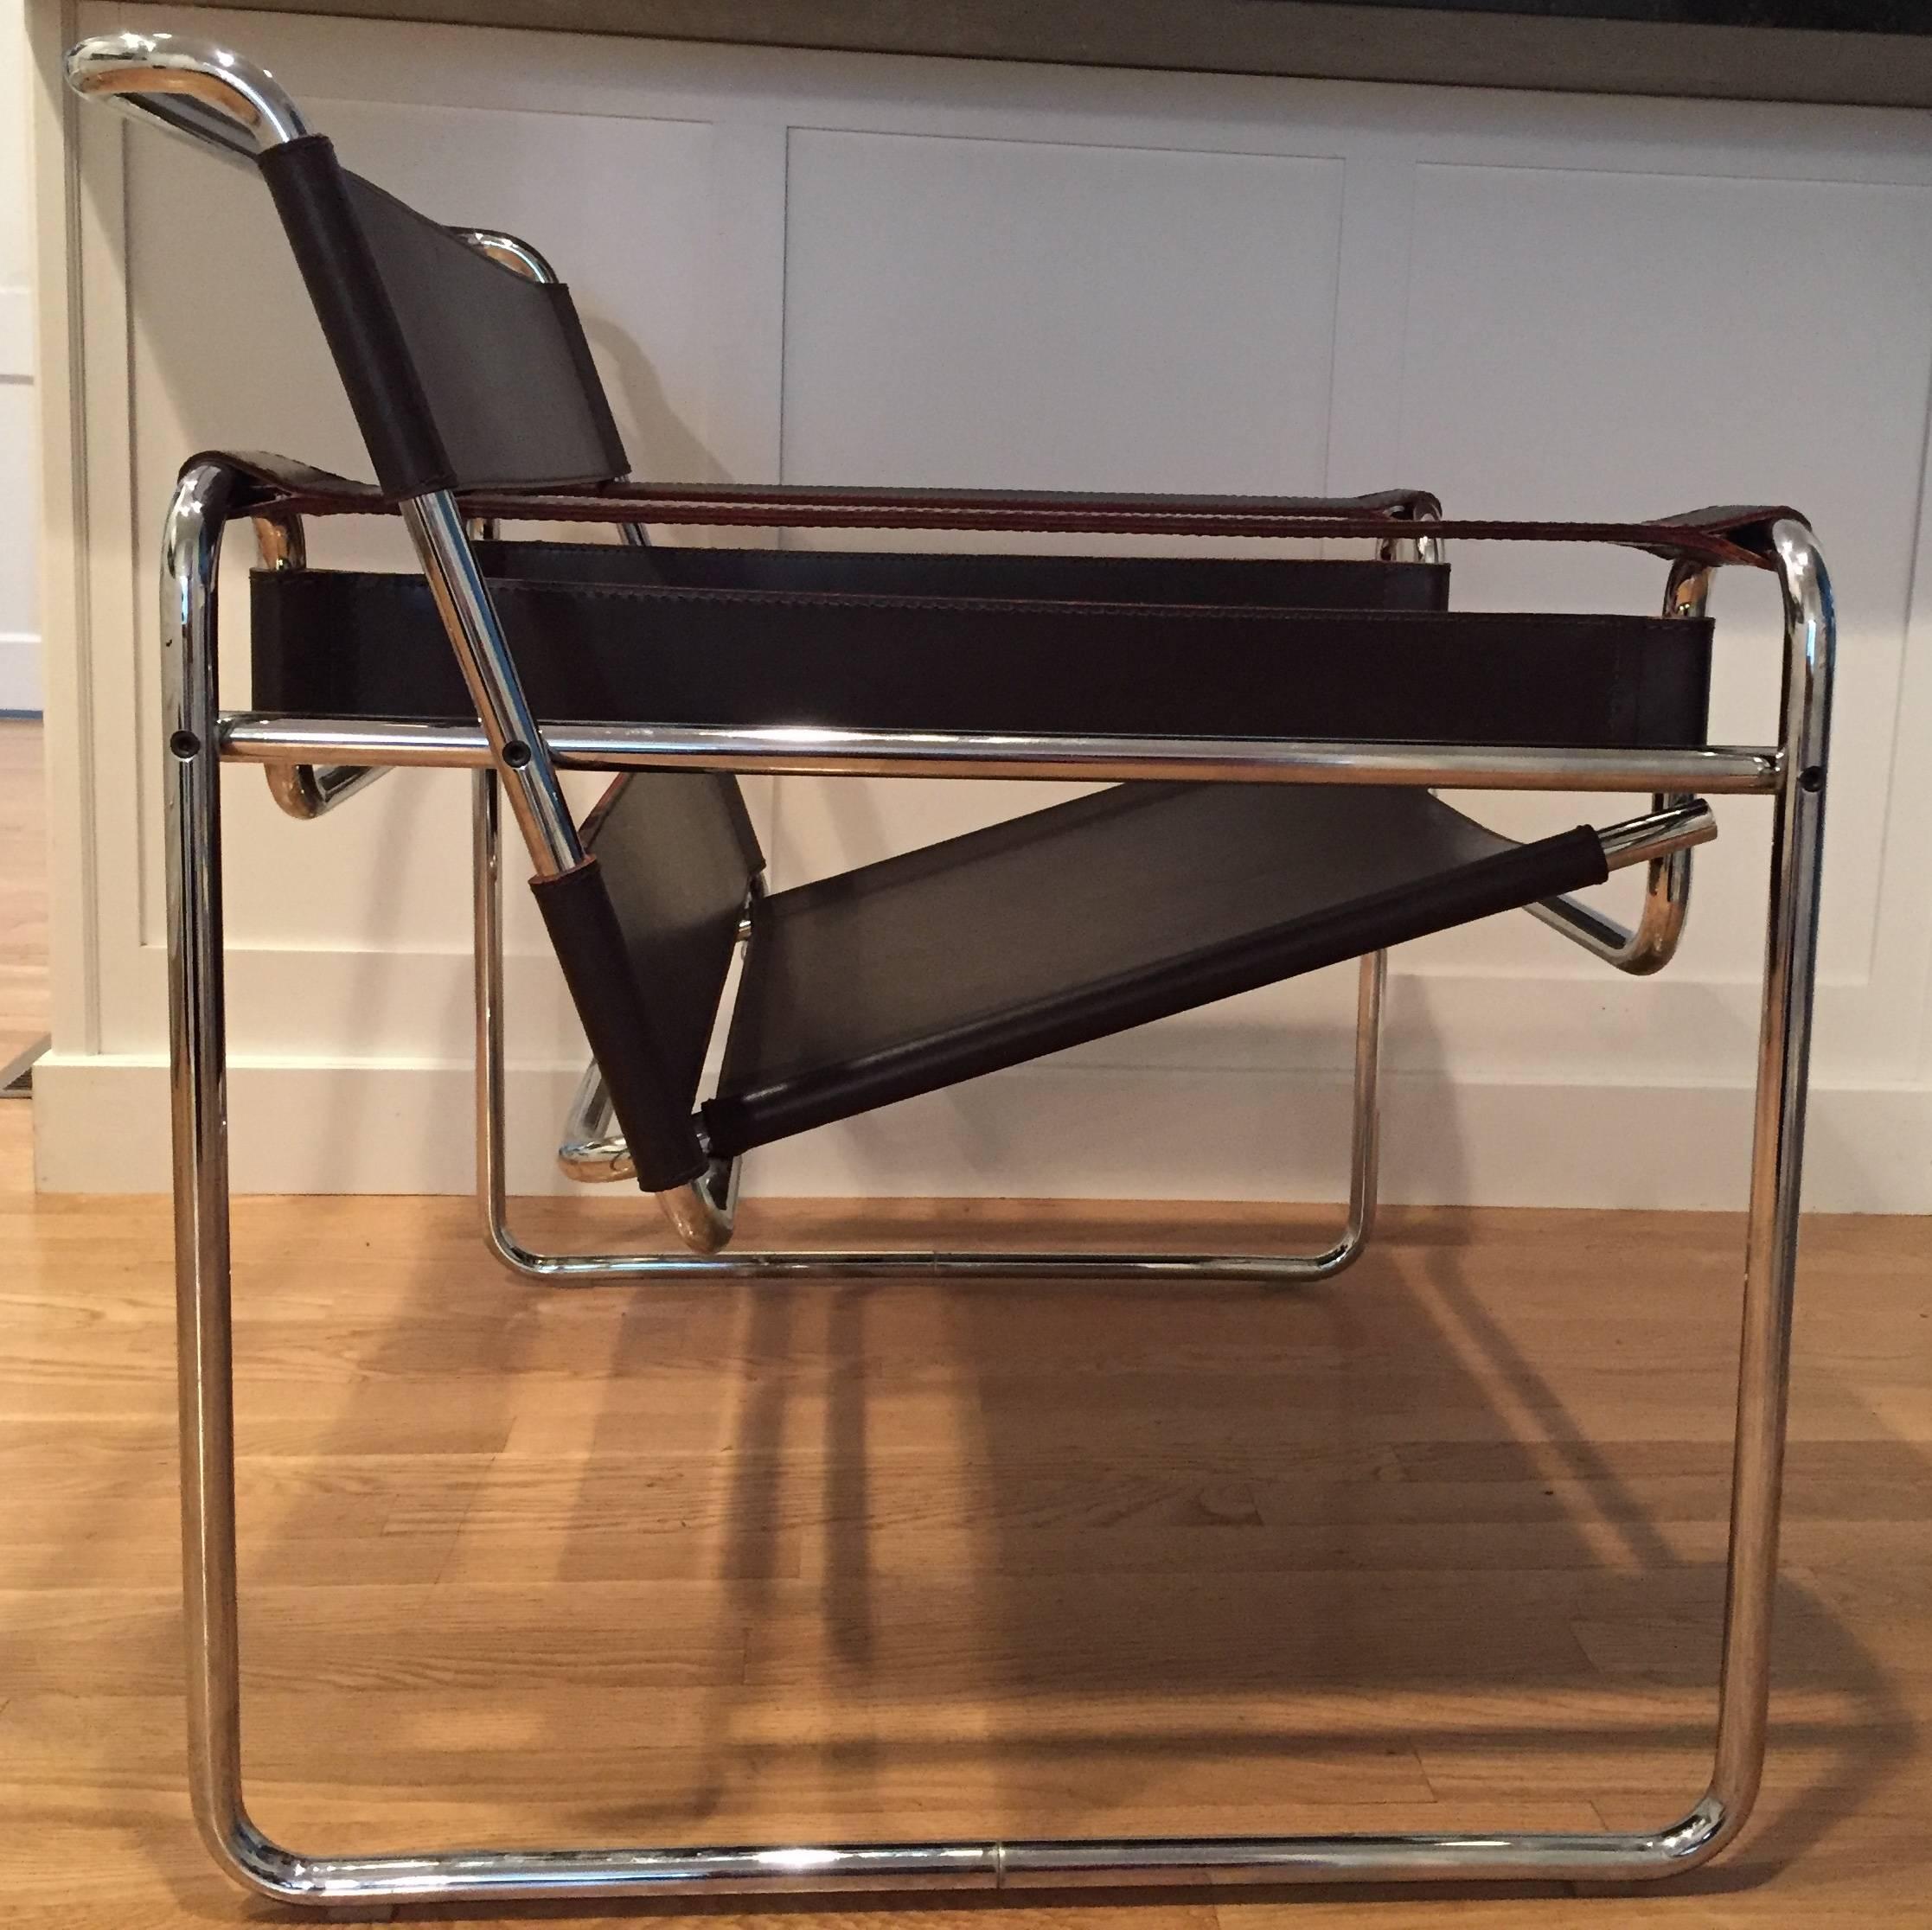 The Wassily chair was designed by Marcel Breuer 1925-1926 while he was the head of cabinetmaking at the Bauhaus in Dessau (Germany).
In the 1960s the chair was produced by the Italian company Gavina, located in Bologna. 1968 Knoll bought the Gavina